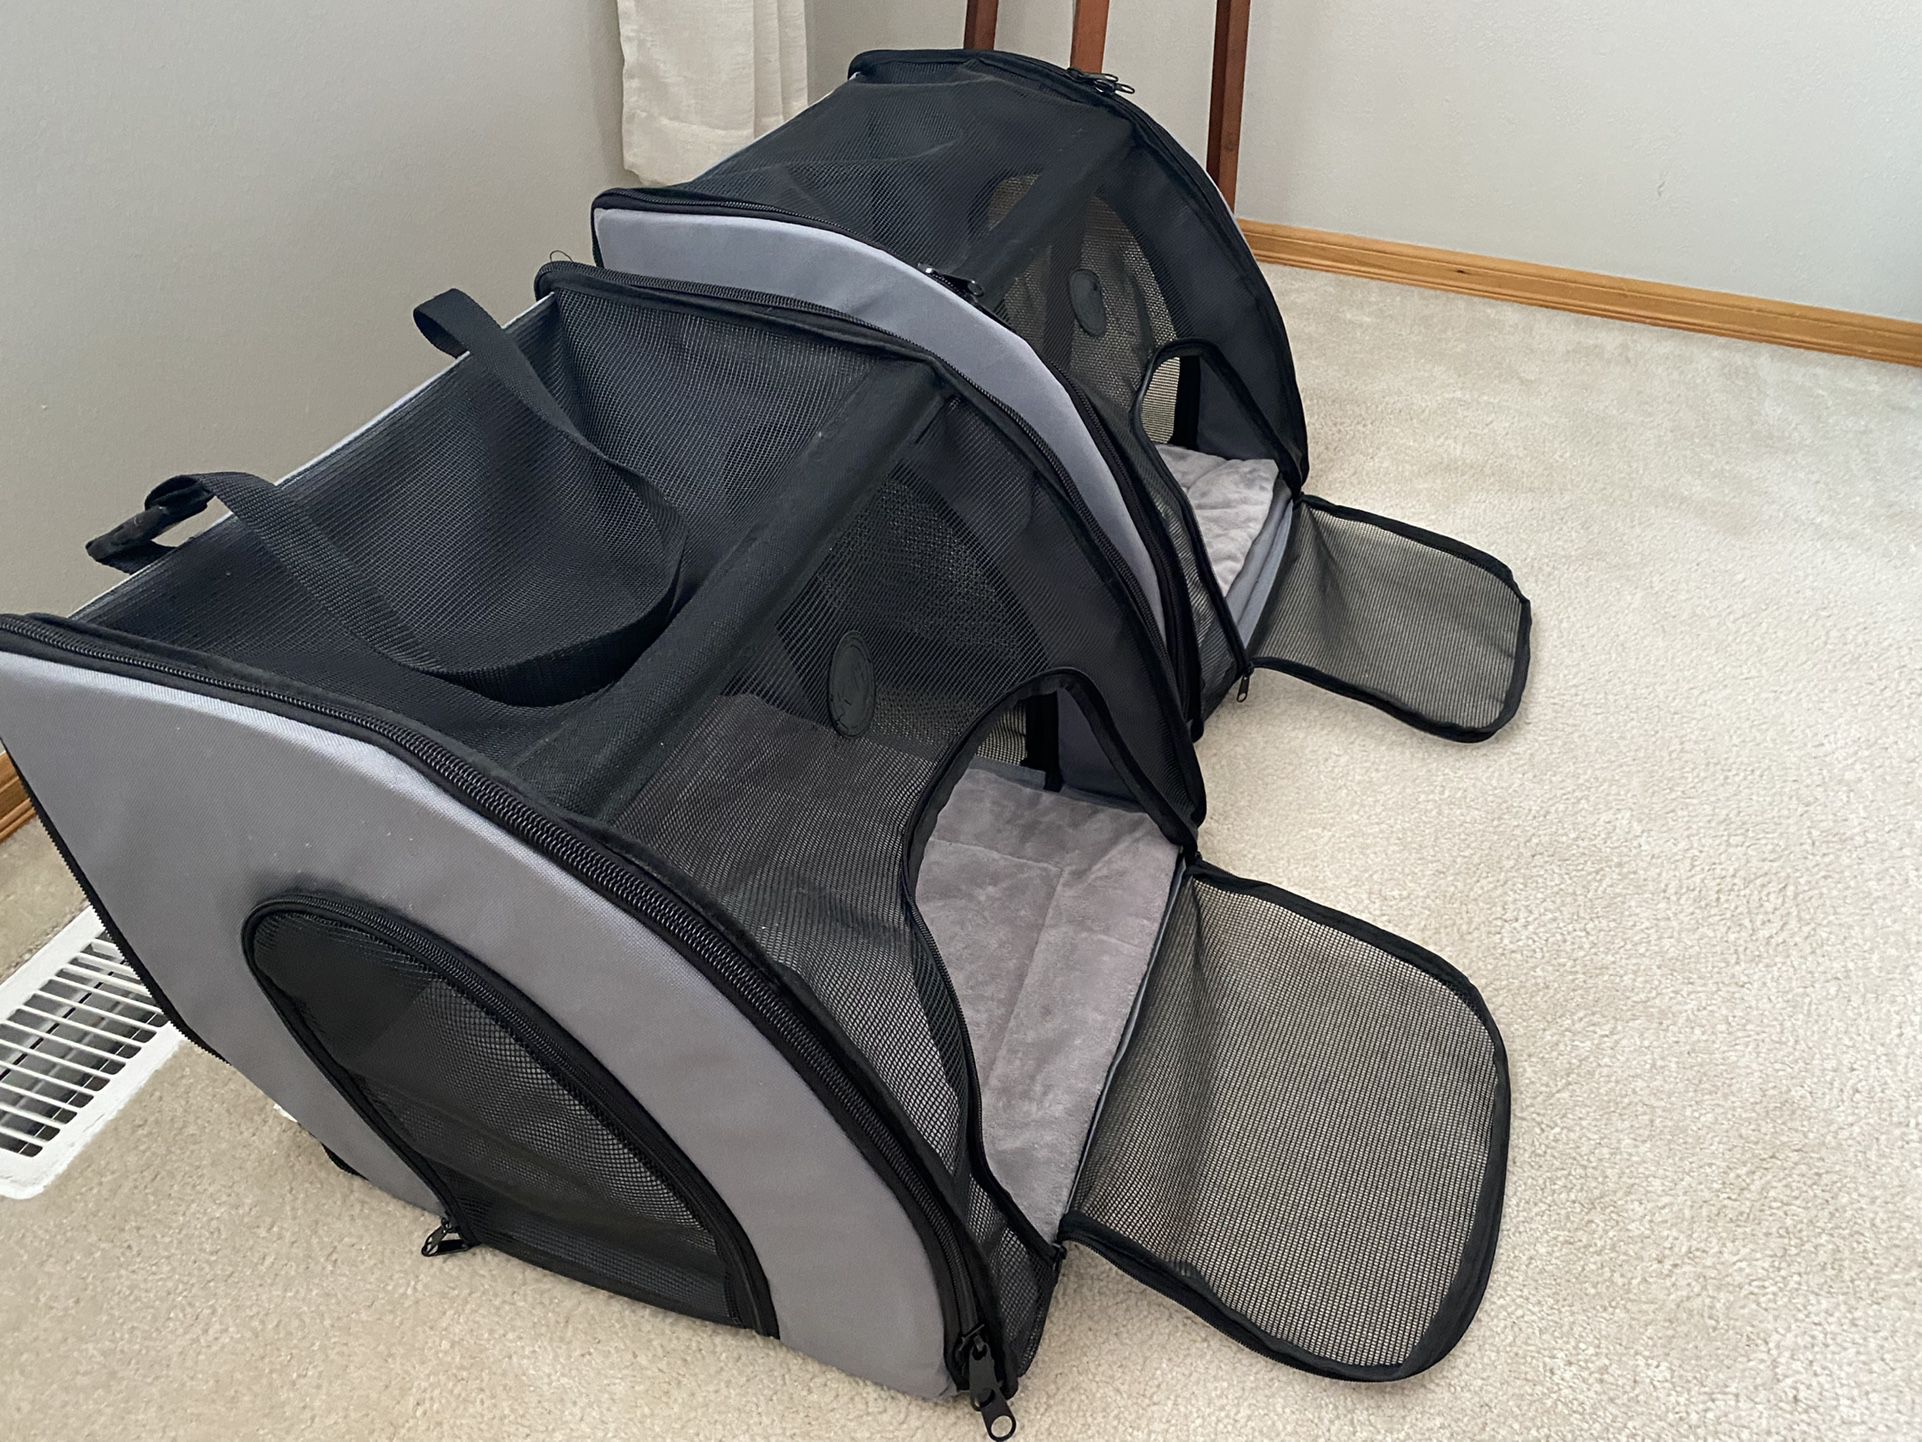 2 Large pet carriers - fully collapsible and breathable. 